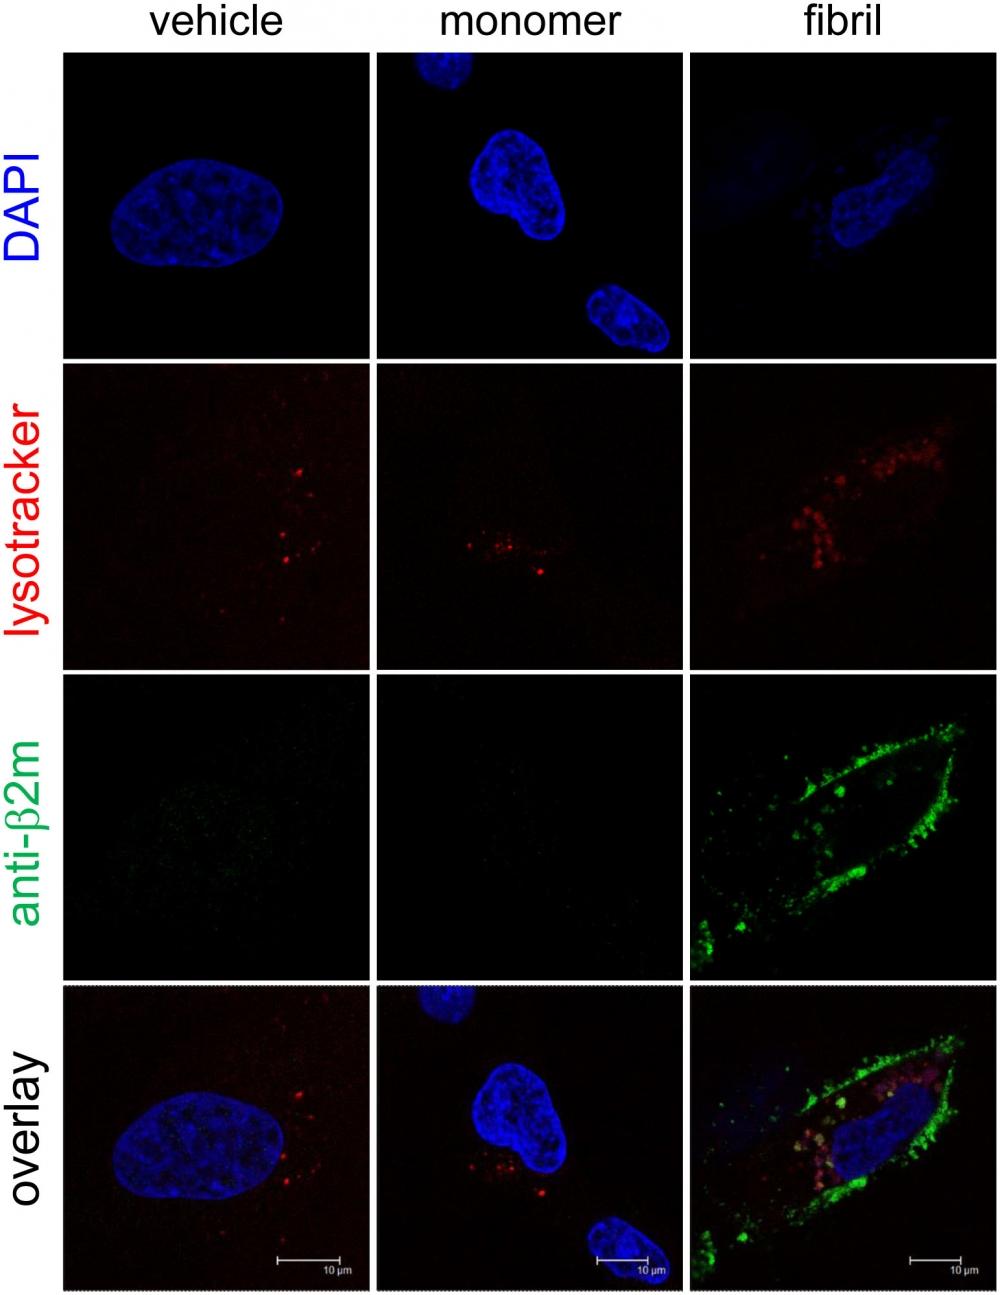 &beta;2-m amyloid fibrils are internalized and sorted to lysosomes. HIG-82 cells incubated with Ham&rsquo;s F12 medium containing vehicle buffer, 10 &mu;g/ml &beta;2-m monomer, or 10 &mu;g/ml &beta;2-m fibrils for 12 hrs were stained for lysosomes (red), &beta;2-m (green), and nuclei (blue), and observed with the confocal laser microscope as described in Materials and Methods. When the cells were incubated with fibrils (right column), green fluorescence indicating &beta;2-m fibrils were observed inside the cells in a granular pattern, as well as on the surface of the cells. Importantly, some green-colored granules containing &beta;2-m fibrils were merged with red-colored lysosomes. The scale bars are 10 &mu;m long. *HIG-82 cells cultured on a glass bottom culture dish (P35G-0-14-C, MatTek), were incubated with Ham&rsquo;s F12 medium containing vehicle buffer, 10 &mu;g/ml &beta;2-m monomer, or 10 &mu;g/ml &beta;2-m fibrils for 12 hrs, washed twice with culture medium, stained with lysotracker (Cell Navigator Lysosome Staining Kit, AAT Bioquest, Inc., Sunnyvale, CA, USA) according to the manufacturer&rsquo;s instructions, washed twice with culture medium, and fixed with 4% paraformaldehyde in PBS for 30 min at 37&deg;C in the dark. Source: Graph from <strong>Endocytosed &beta;2-Microglobulin Amyloid Fibrils Induce Necrosis and Apoptosis of Rabbit Synovial Fibroblasts by Disrupting Endosomal/Lysosomal Membranes: A Novel Mechanism on the Cytotoxicity of Amyloid Fibrils</strong> by Tadakazu Okoshi, et al., <em>PLoS ONE</em>, Sep.&nbsp; 2015.&nbsp;